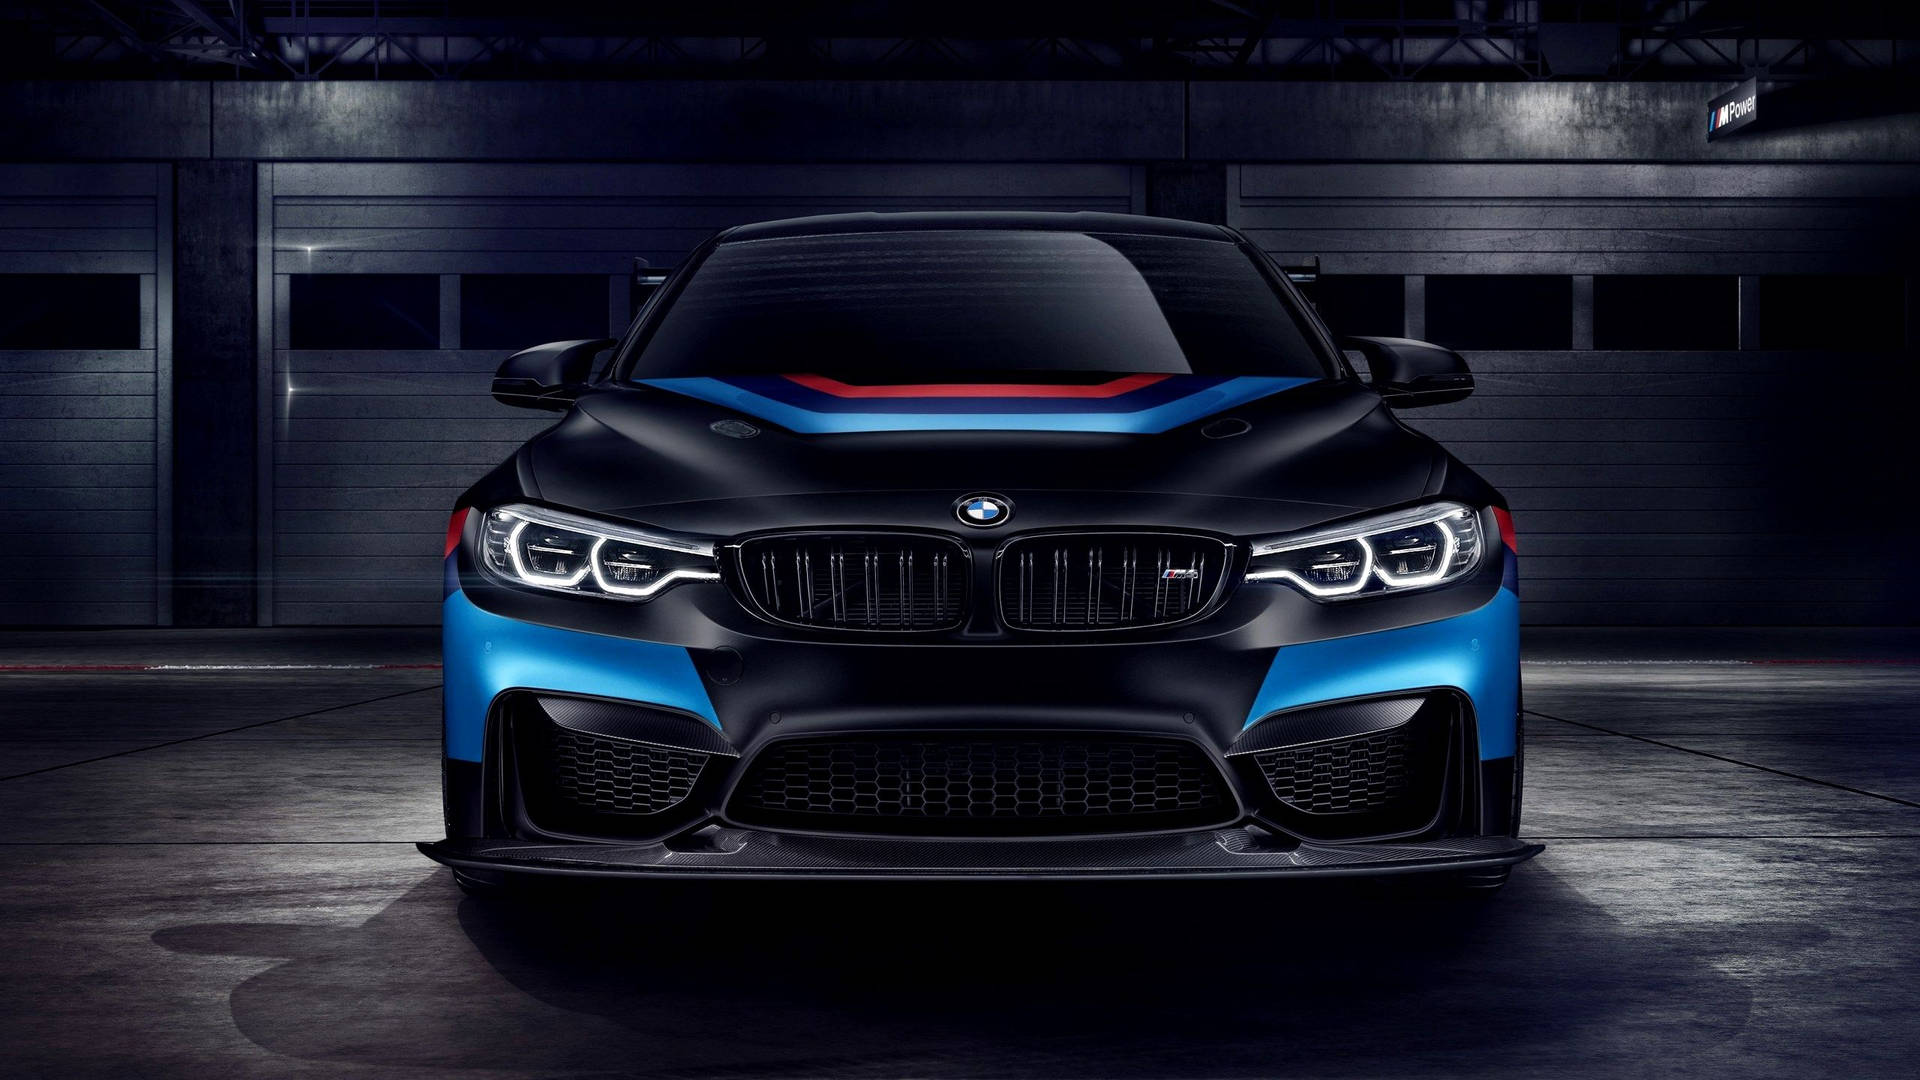 "The Smooth and Stylish BMW" Wallpaper